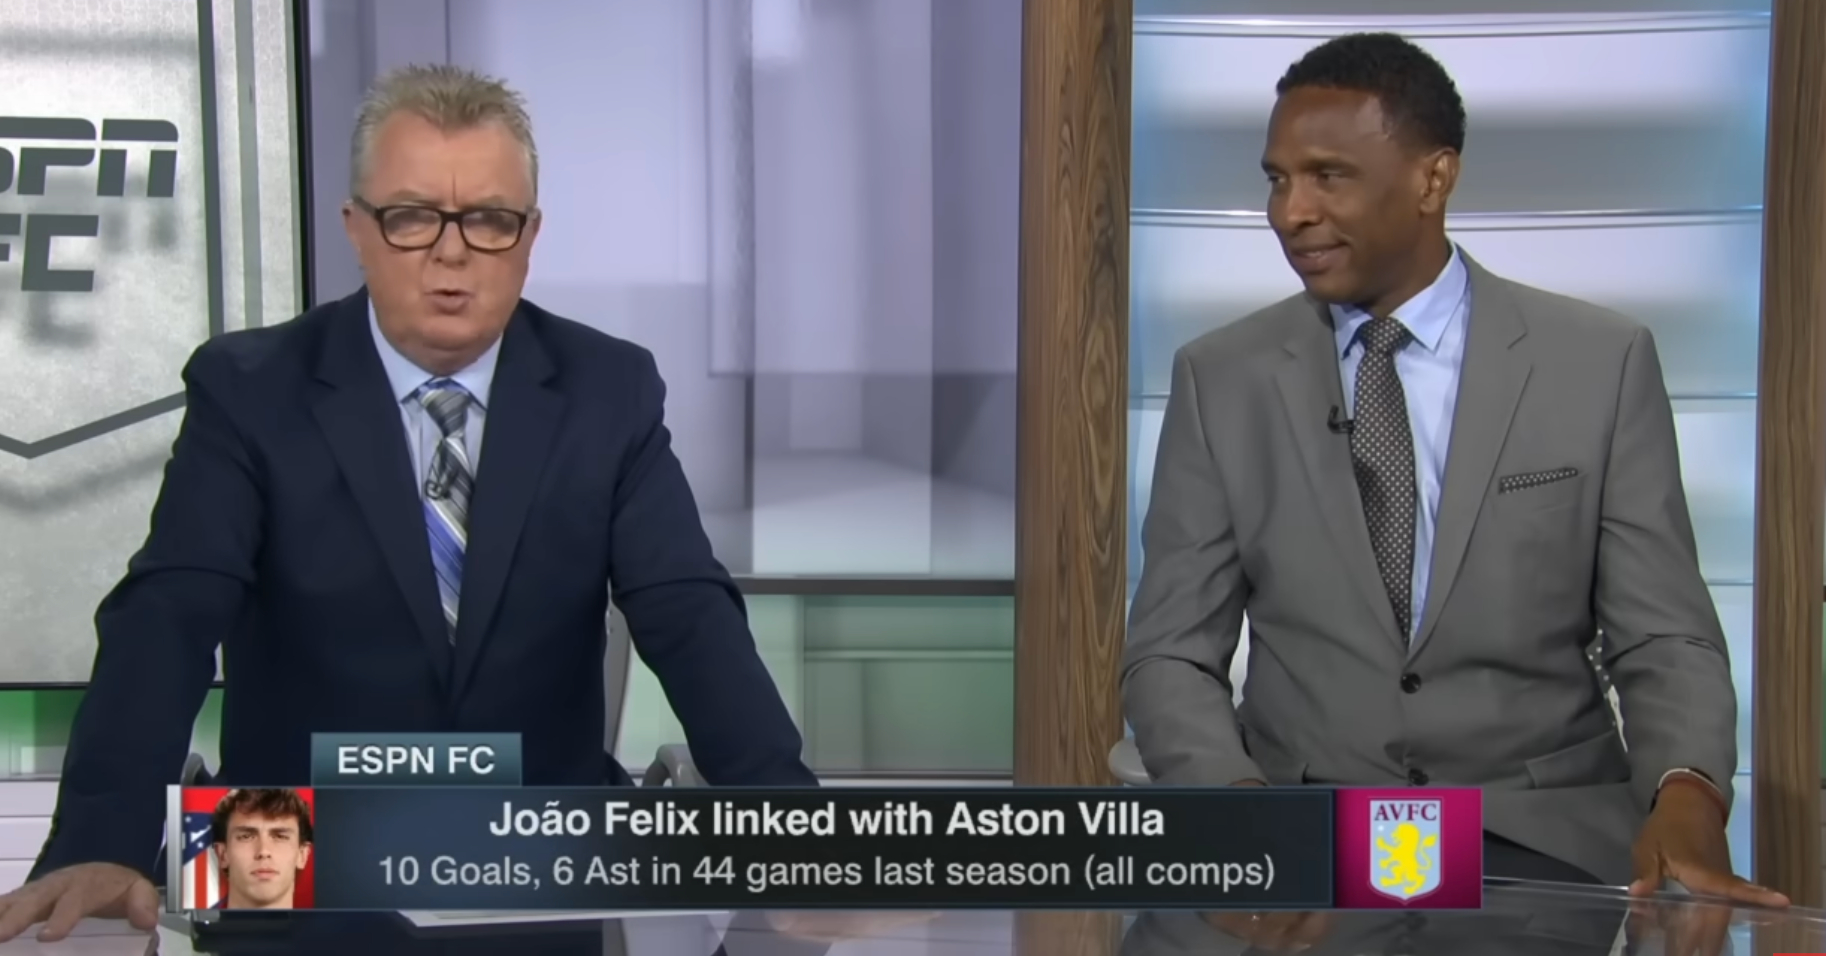 Video: “Players that get coaches sacked” – Steve Nicol warns Emery over £50m capture